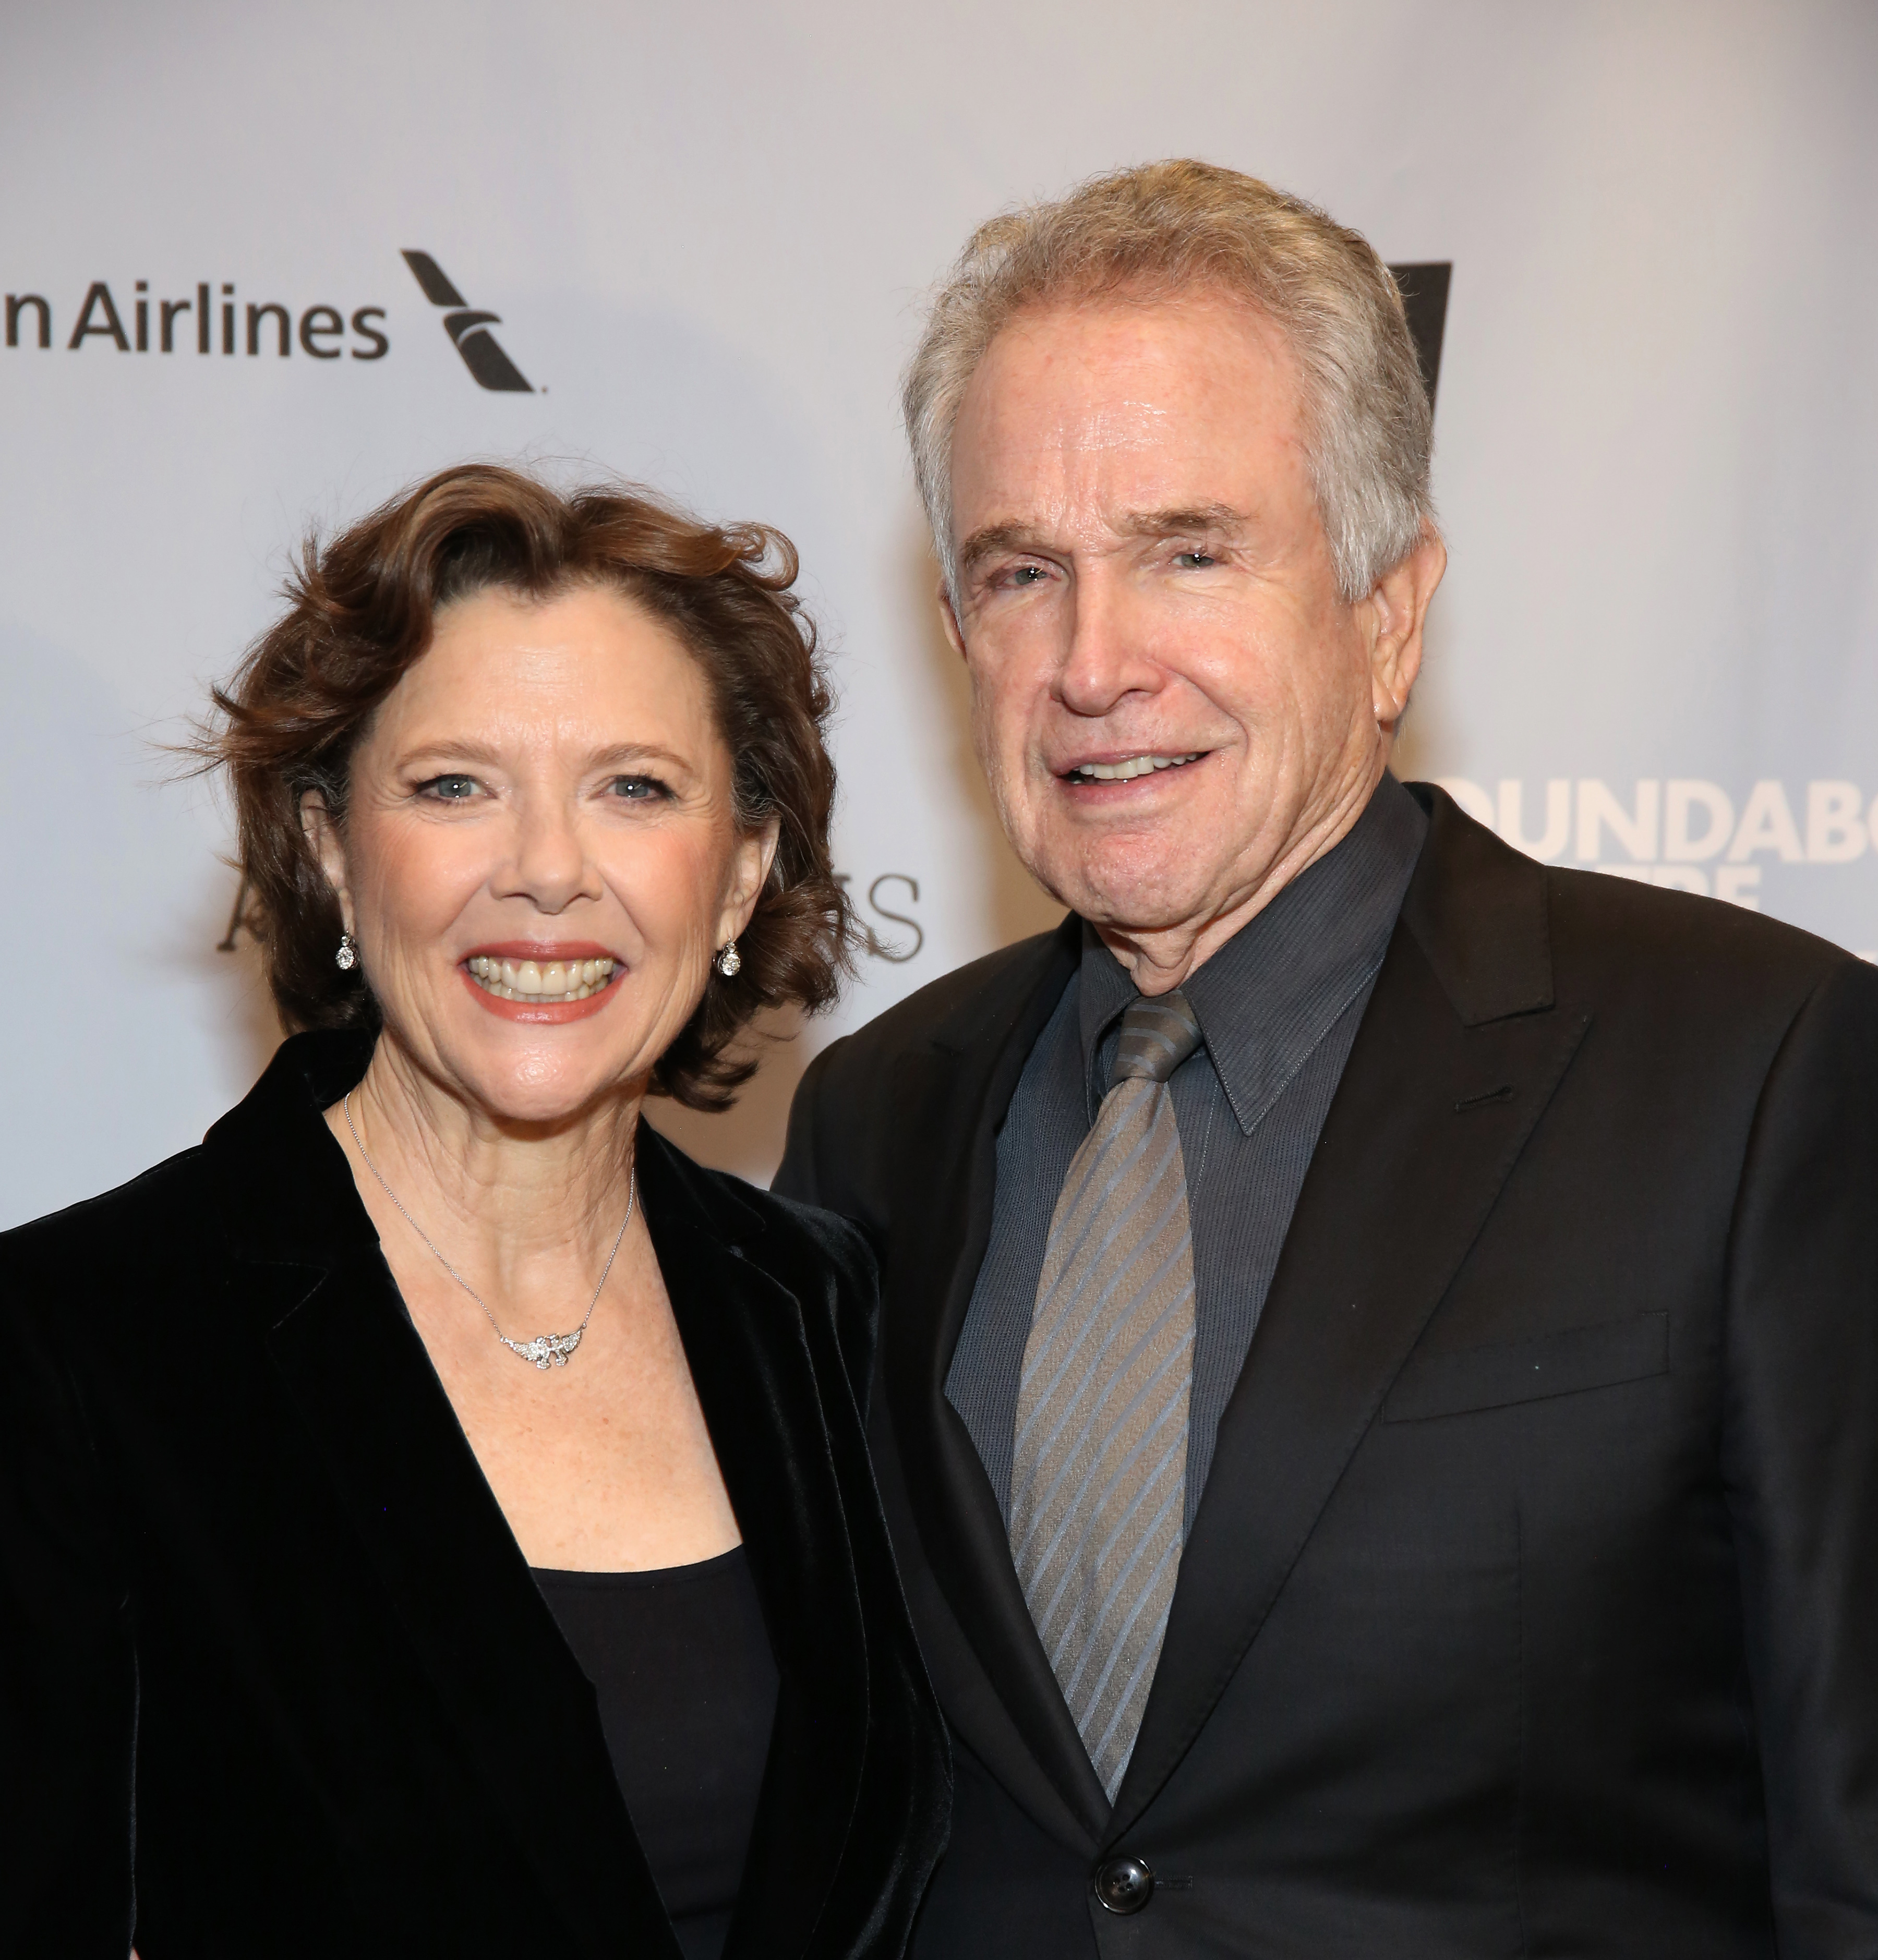 Annette Bening and Warren Beatty attend the Broadway Opening Night After Party for "All My Sons" on April 22, 2019 in New York City | Source: Getty Images